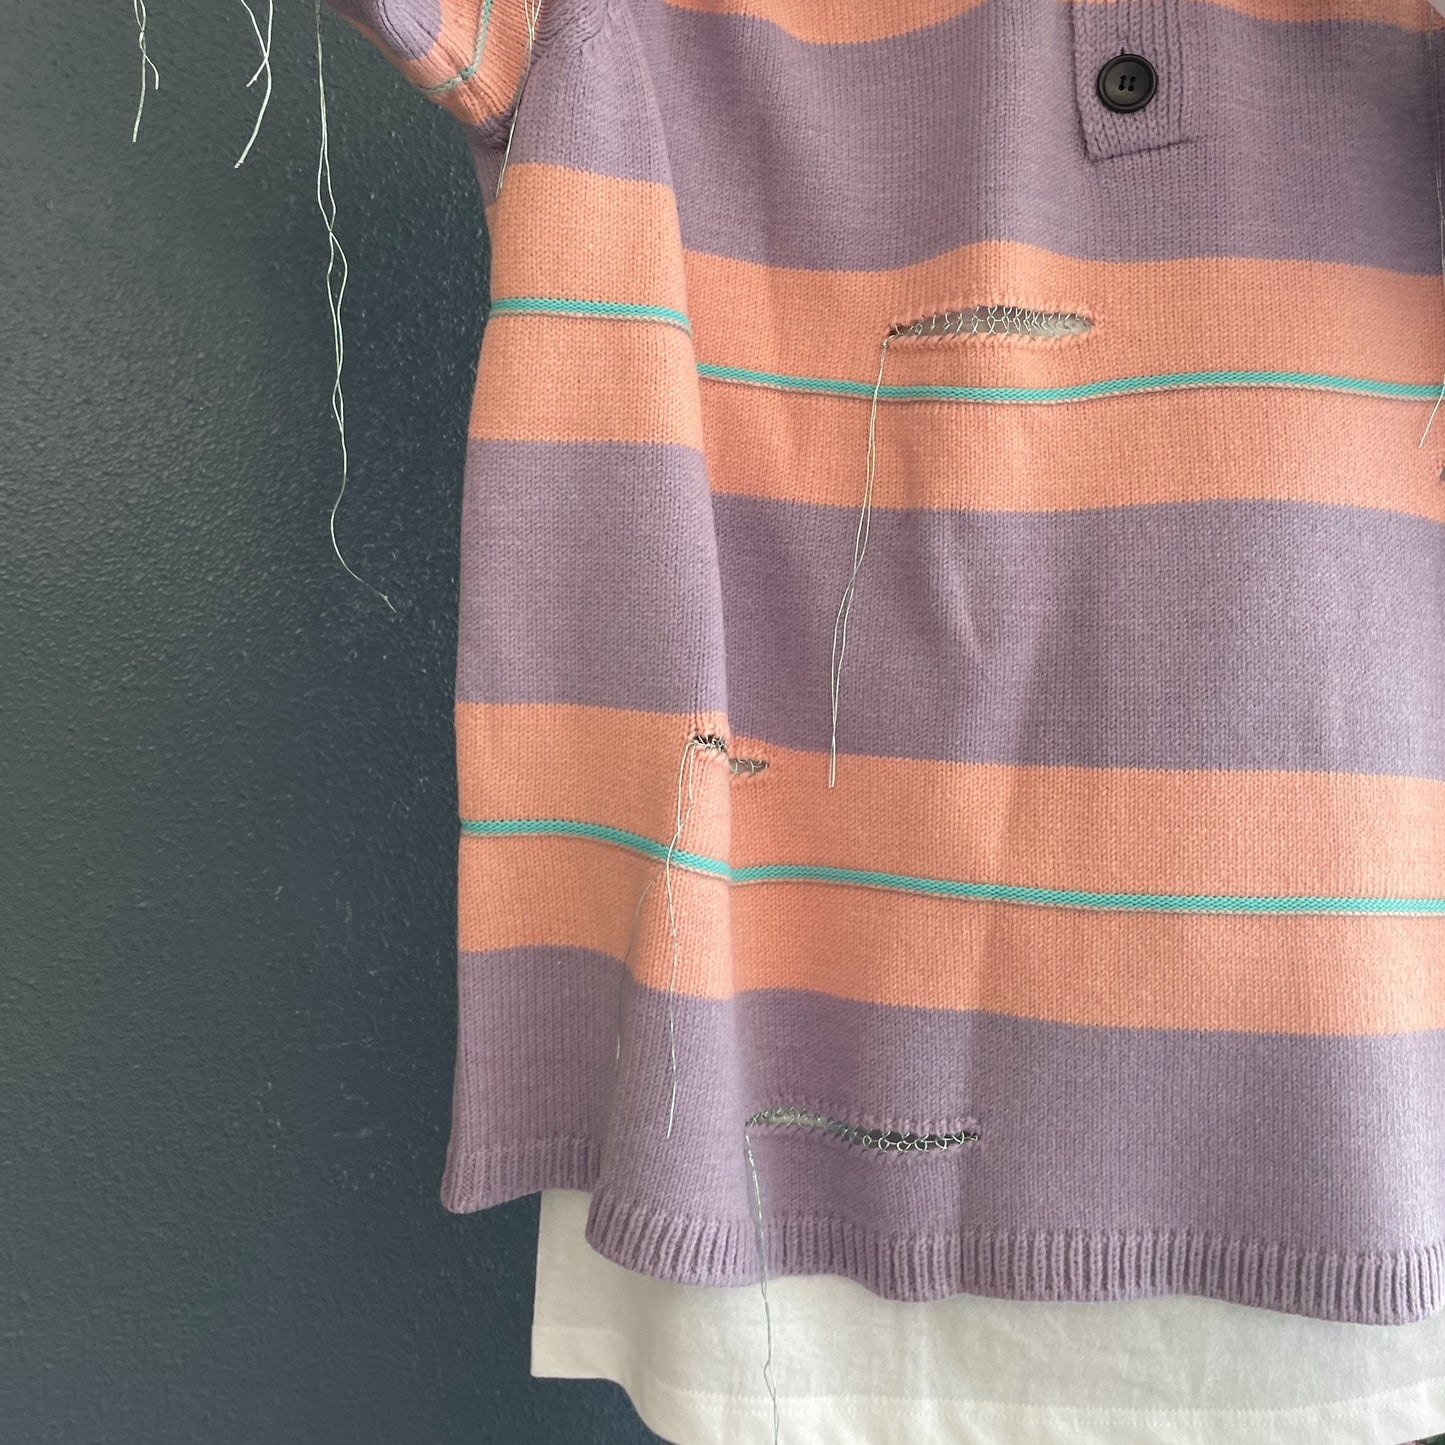 OVERSIZD BORDER POLO KNIT COLLAB WITH rurumu: / PINK × LAVENDER / ボーダーニットポロ